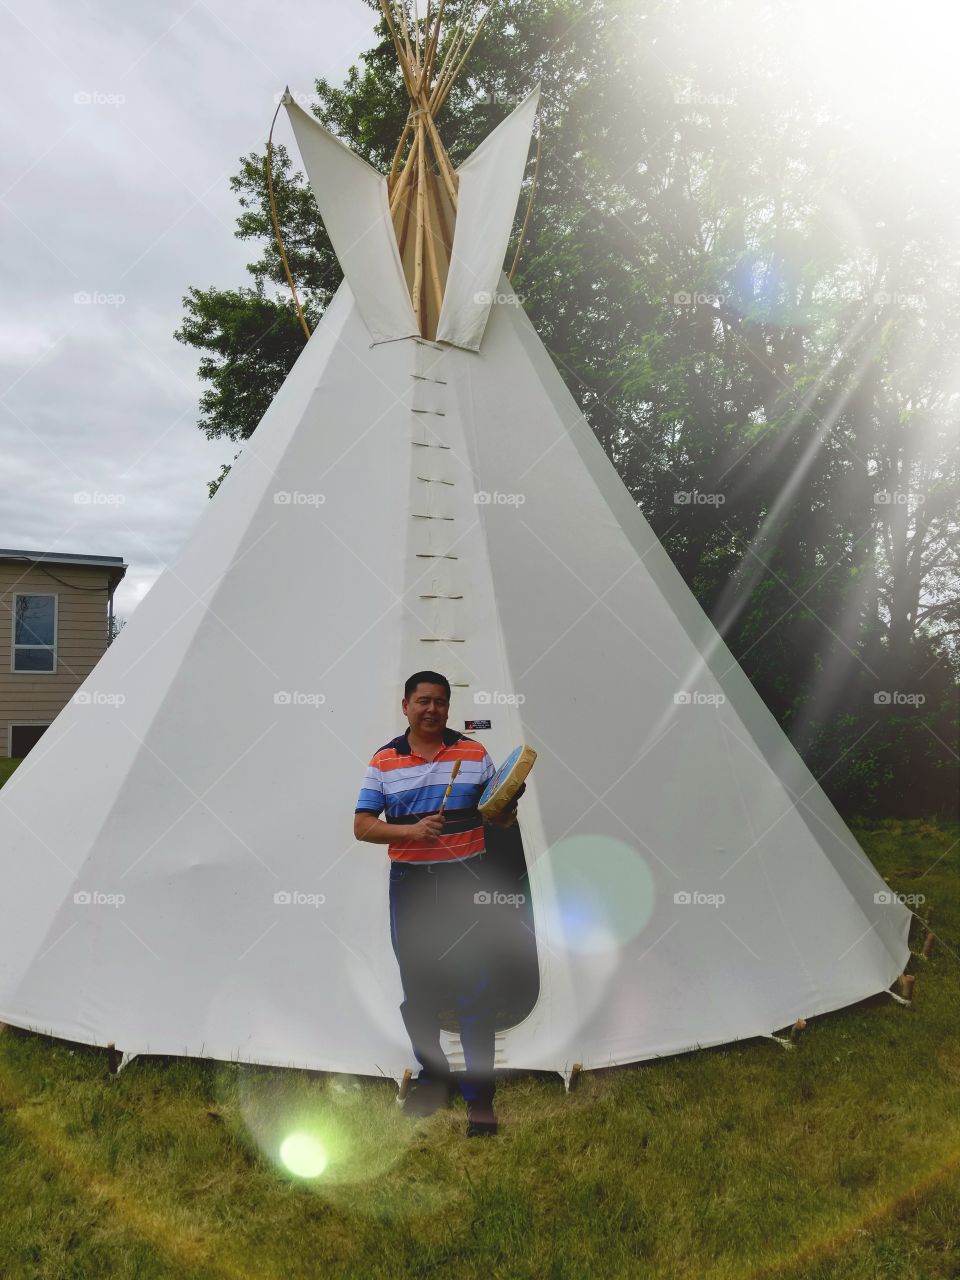 indigenous man drums in front of a teepee constructed as a classroom for indigenous students.